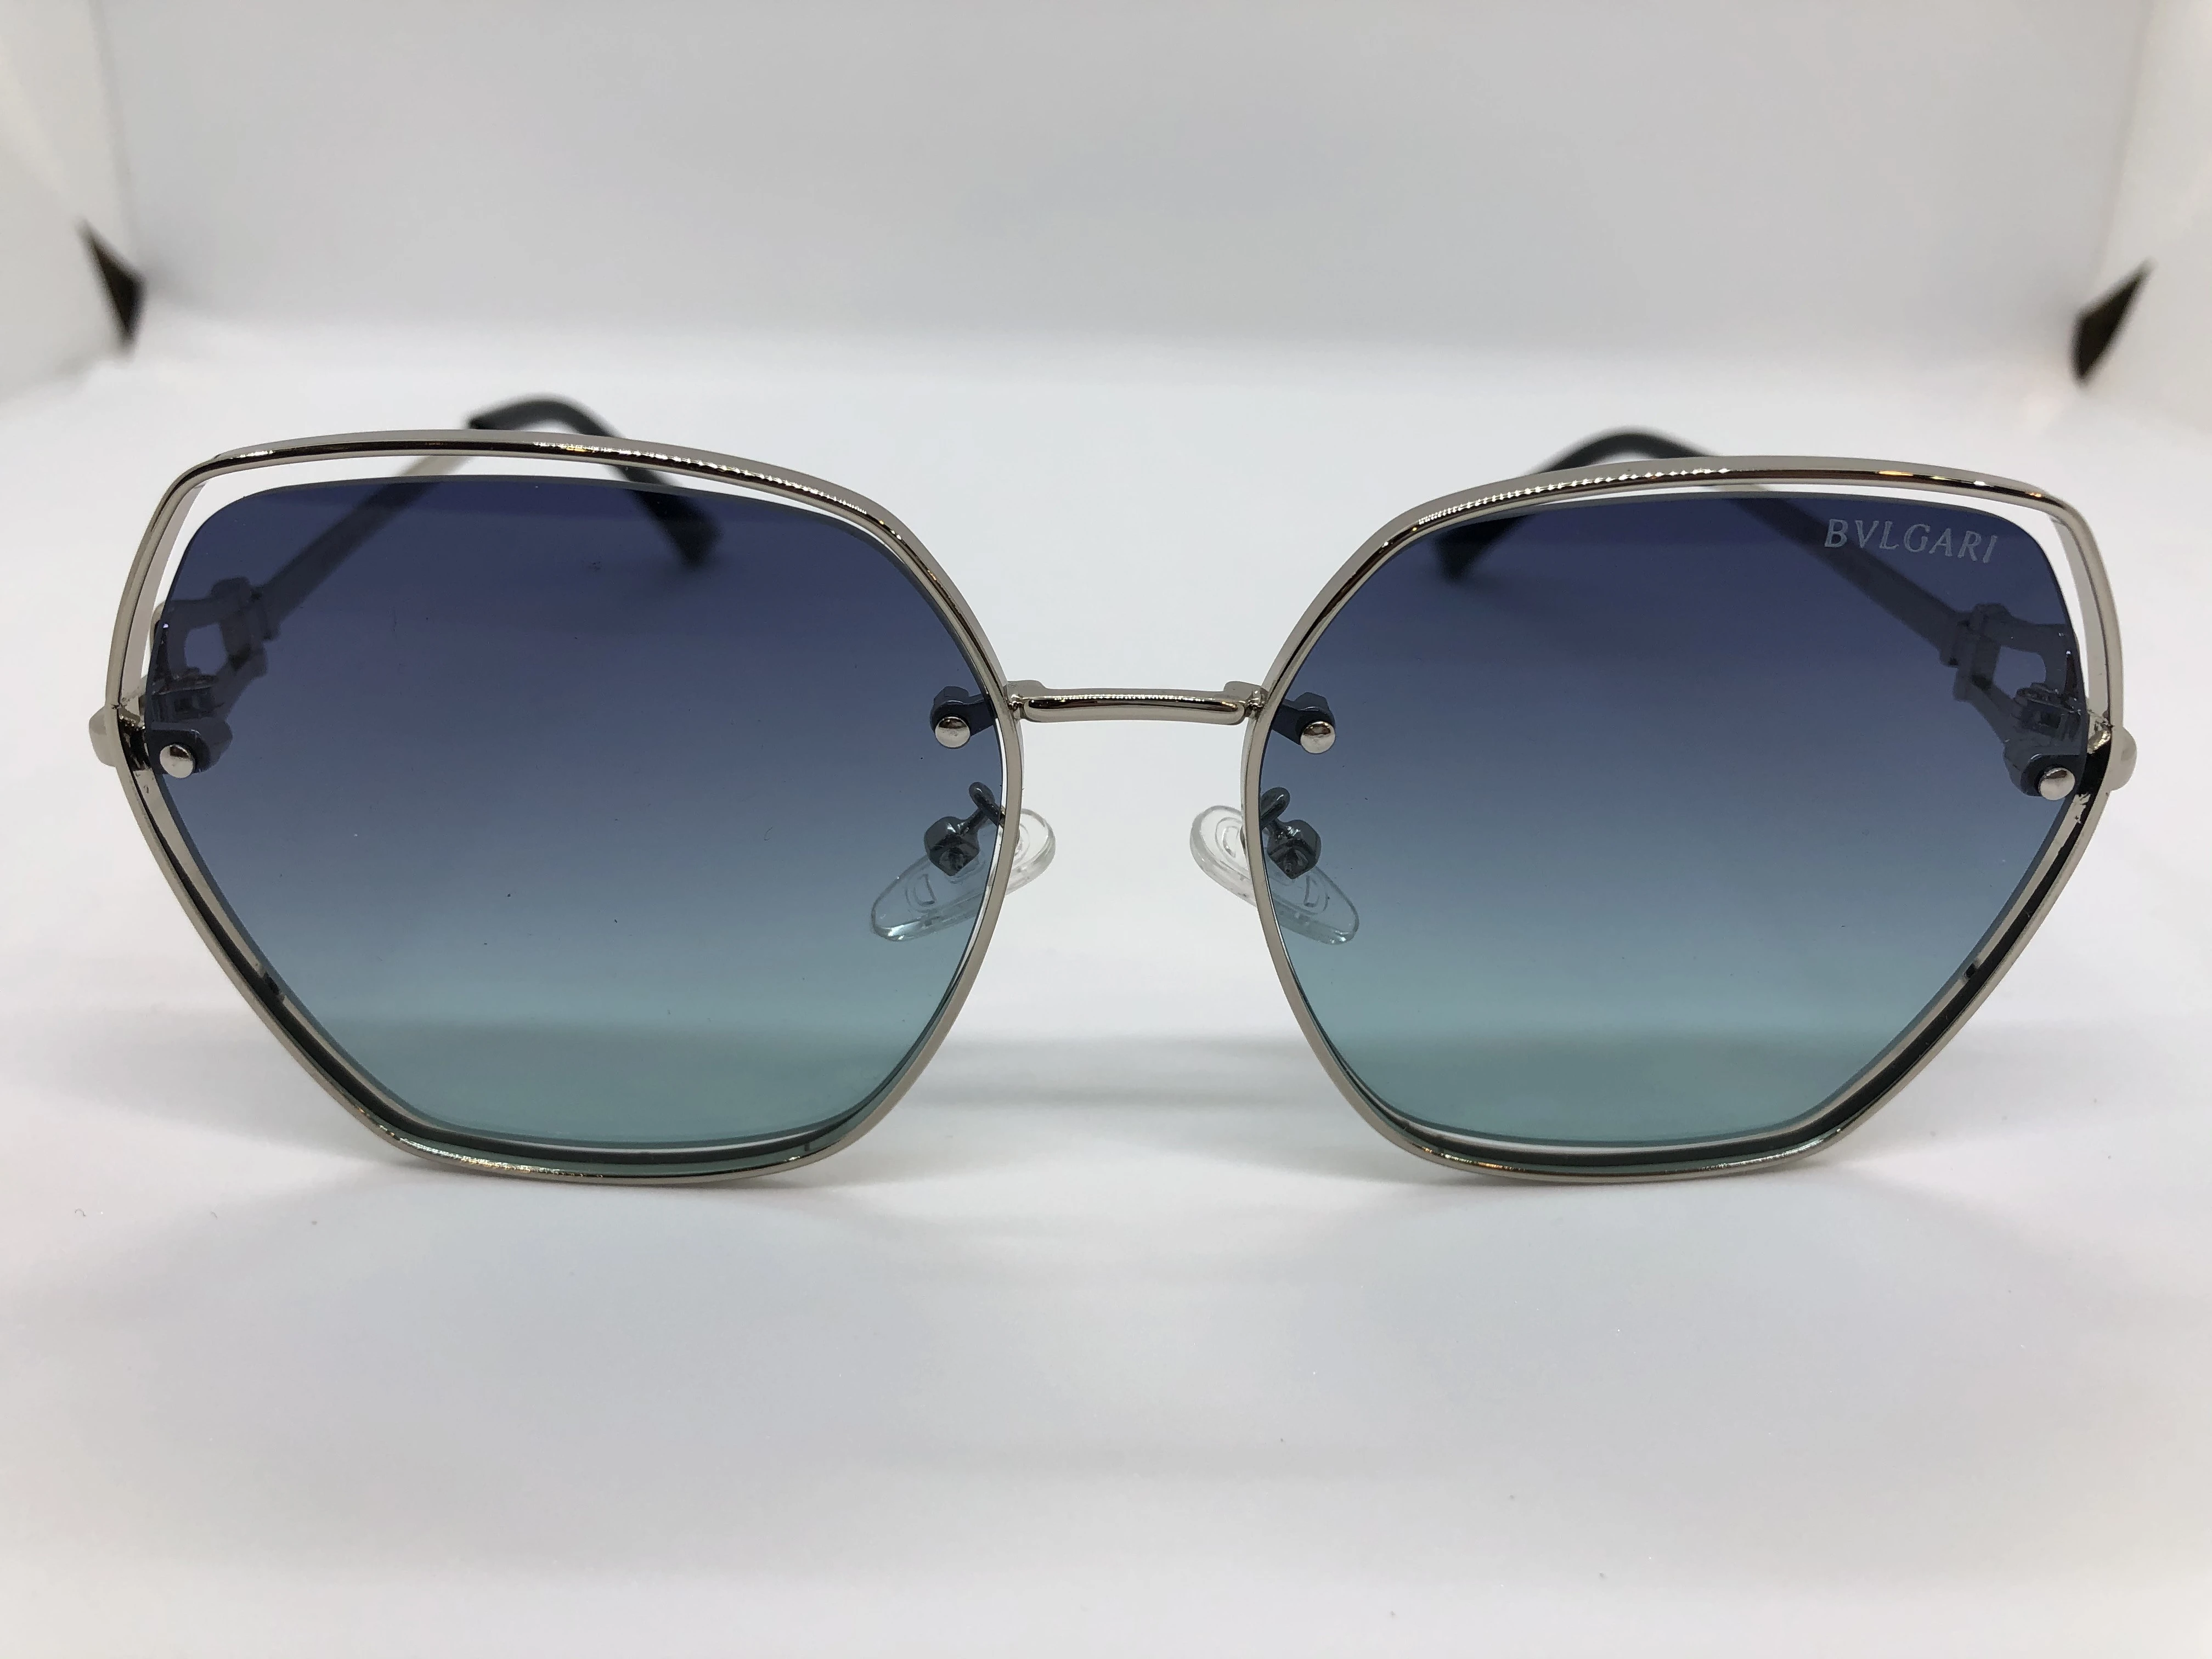 Sunglasses - from Bvlgari - silver metal frame - gradient colored lenses - silver metal arm - silver brand logo - for women